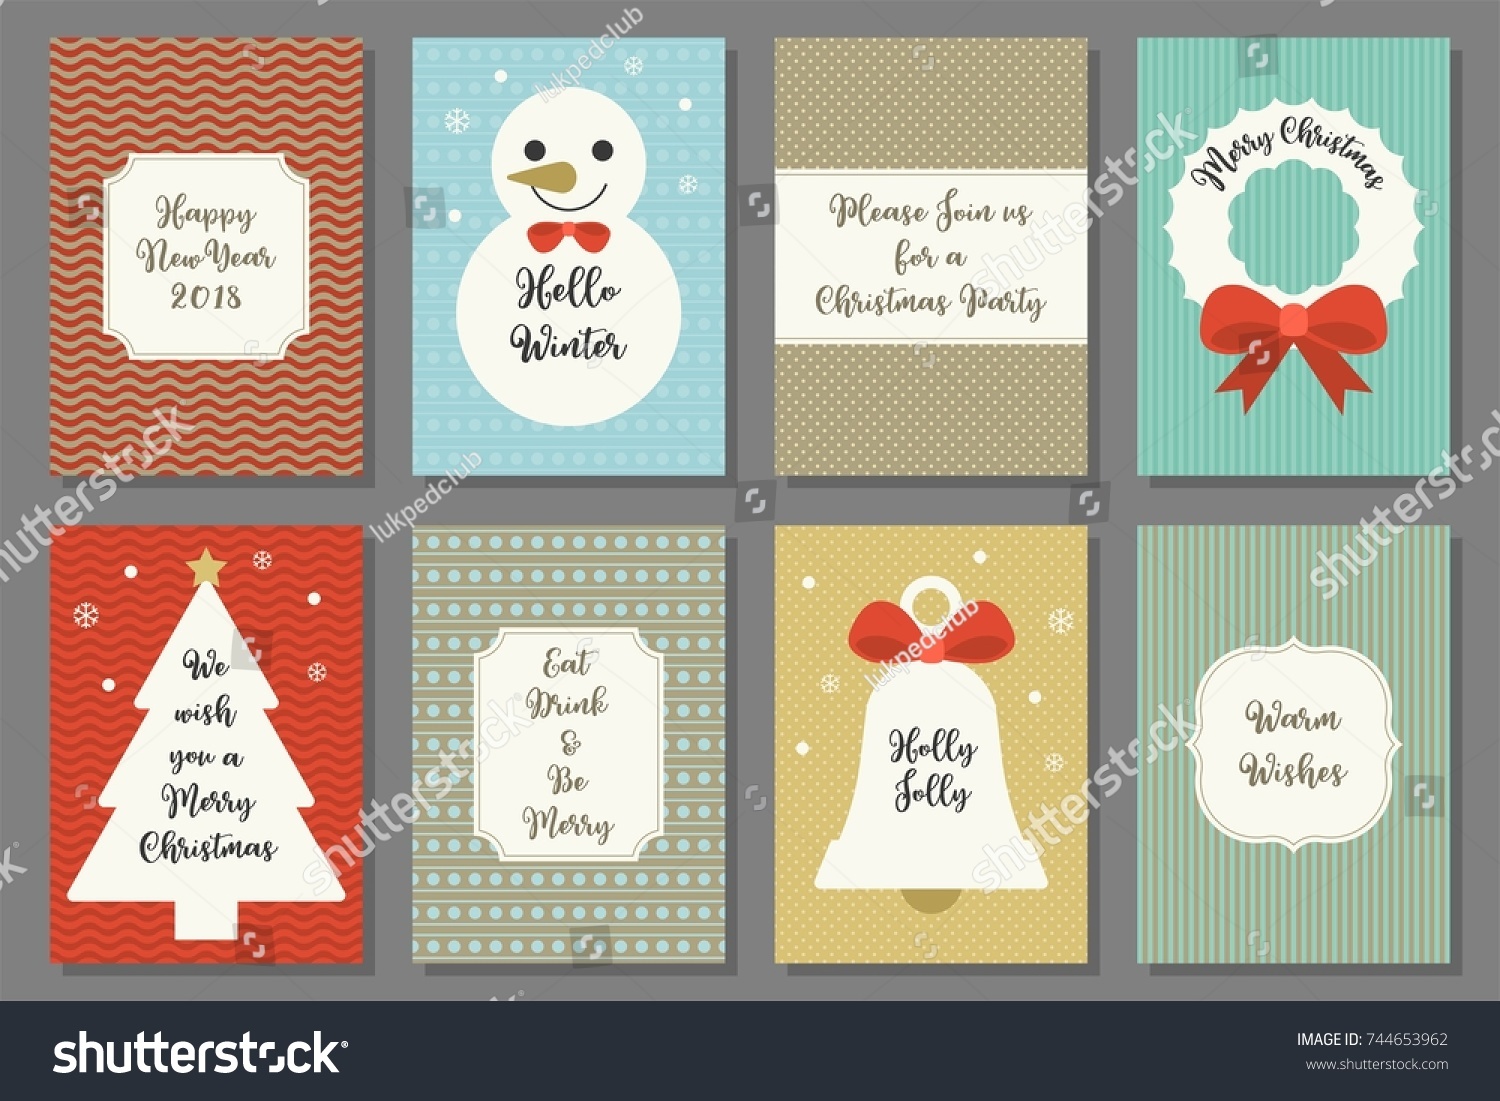 Merry Christmas typography on retro frame and elements for holidays greeting card template and pattern